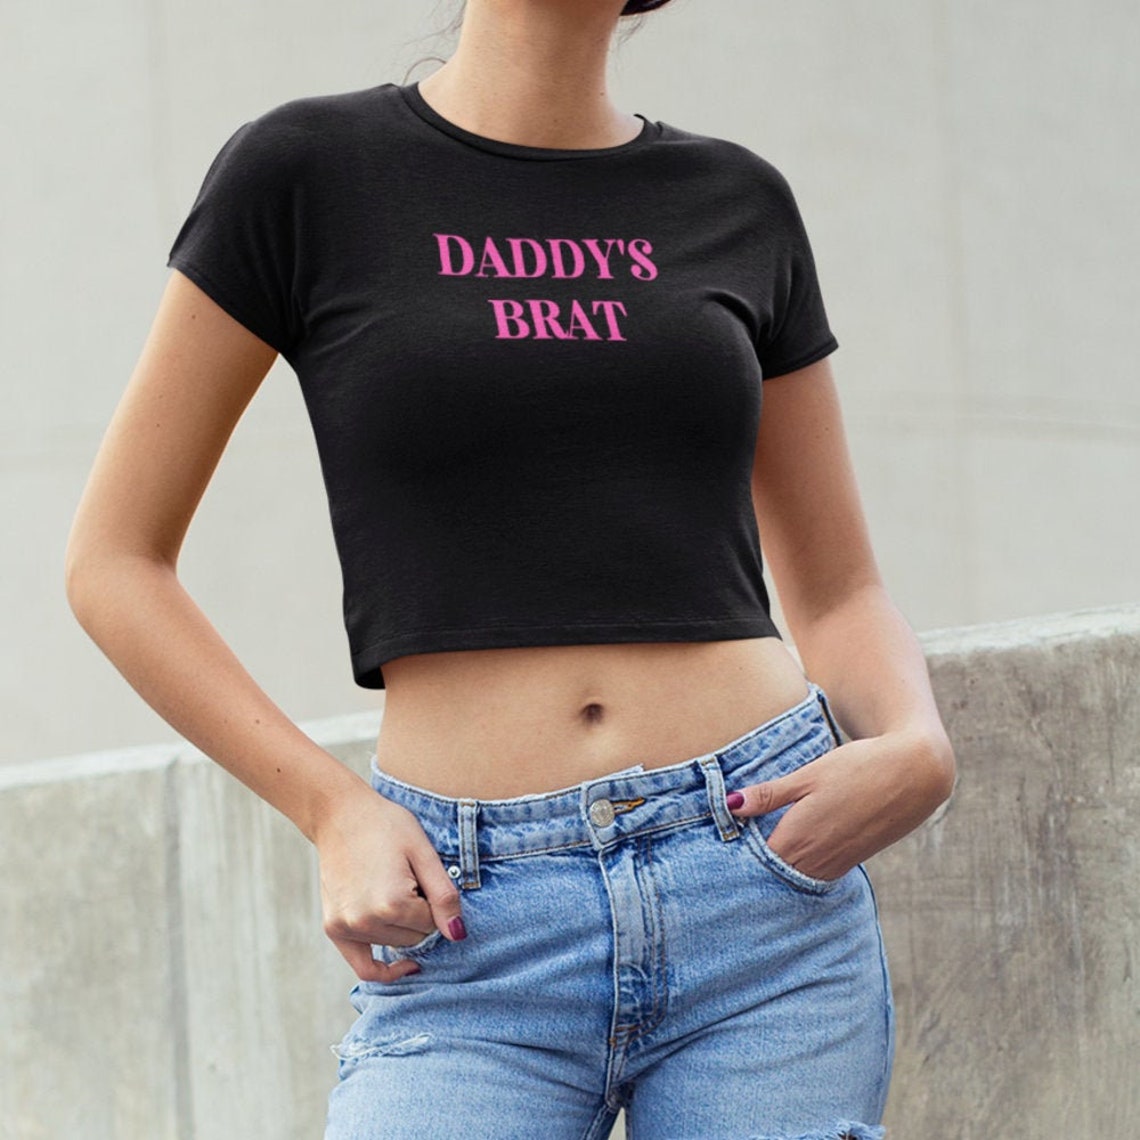 Daddy S Brat Crop Top Ddlg Clothes Submissive Etsy